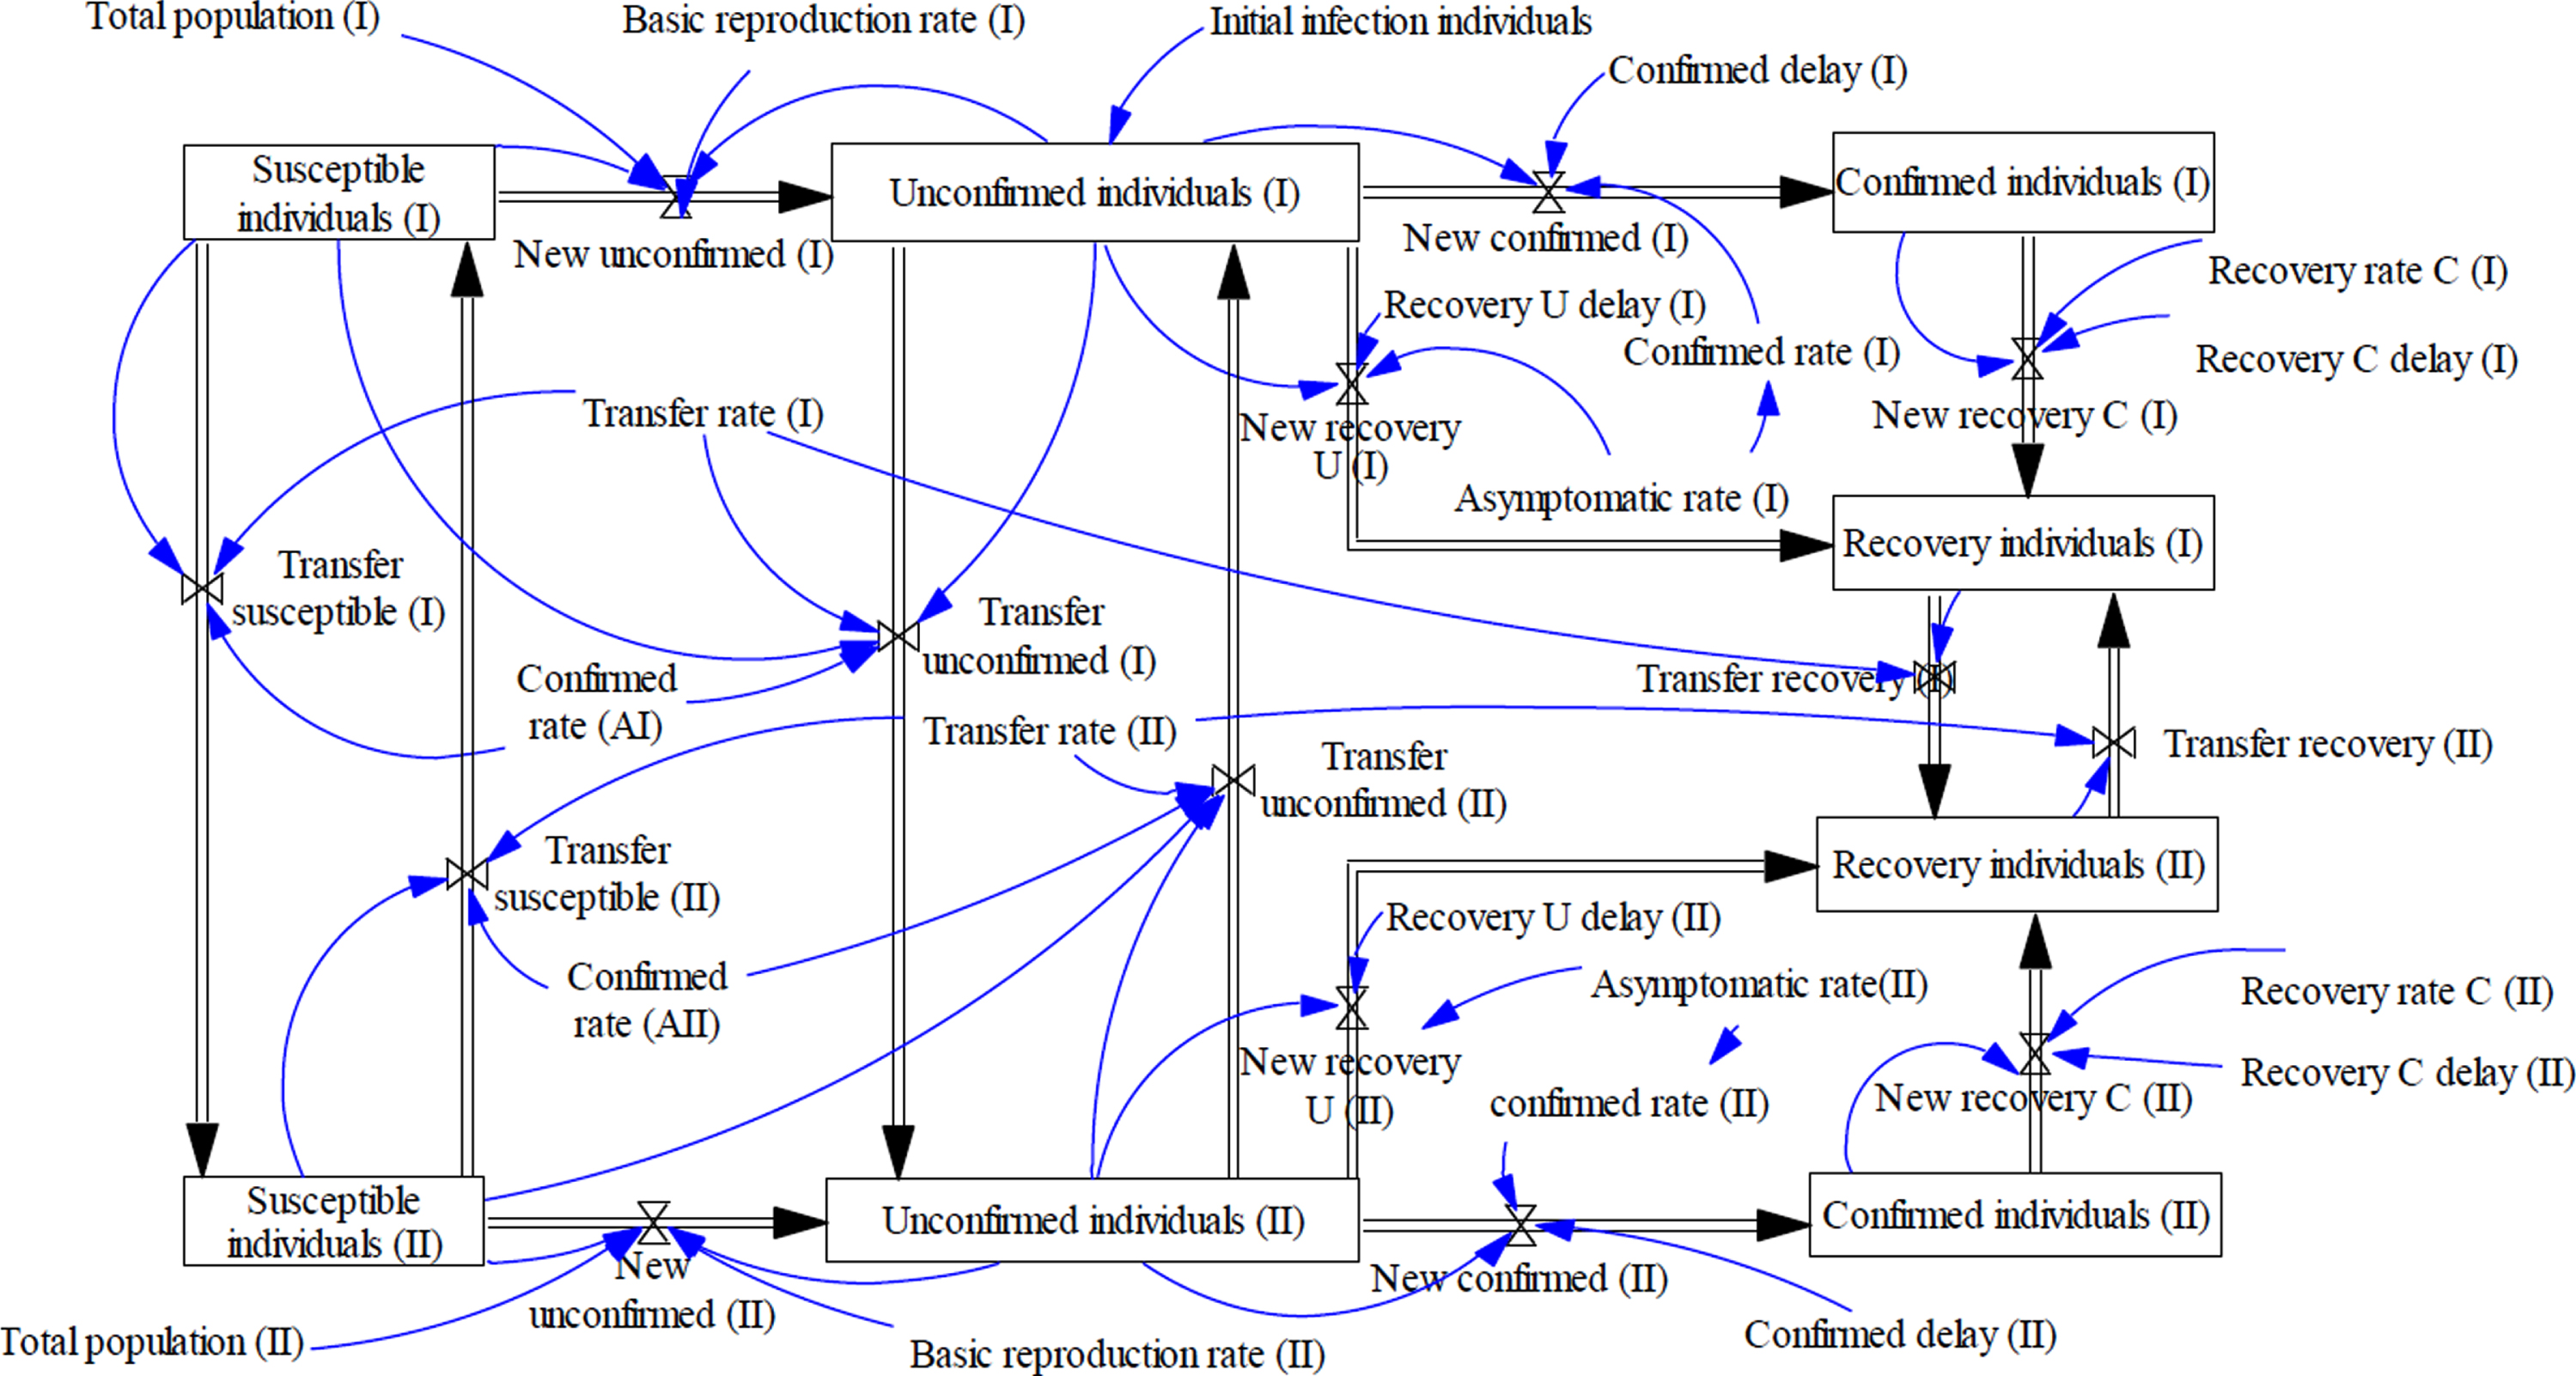 The system dynamics model of COVID-19 spreading in two countries through air transportation